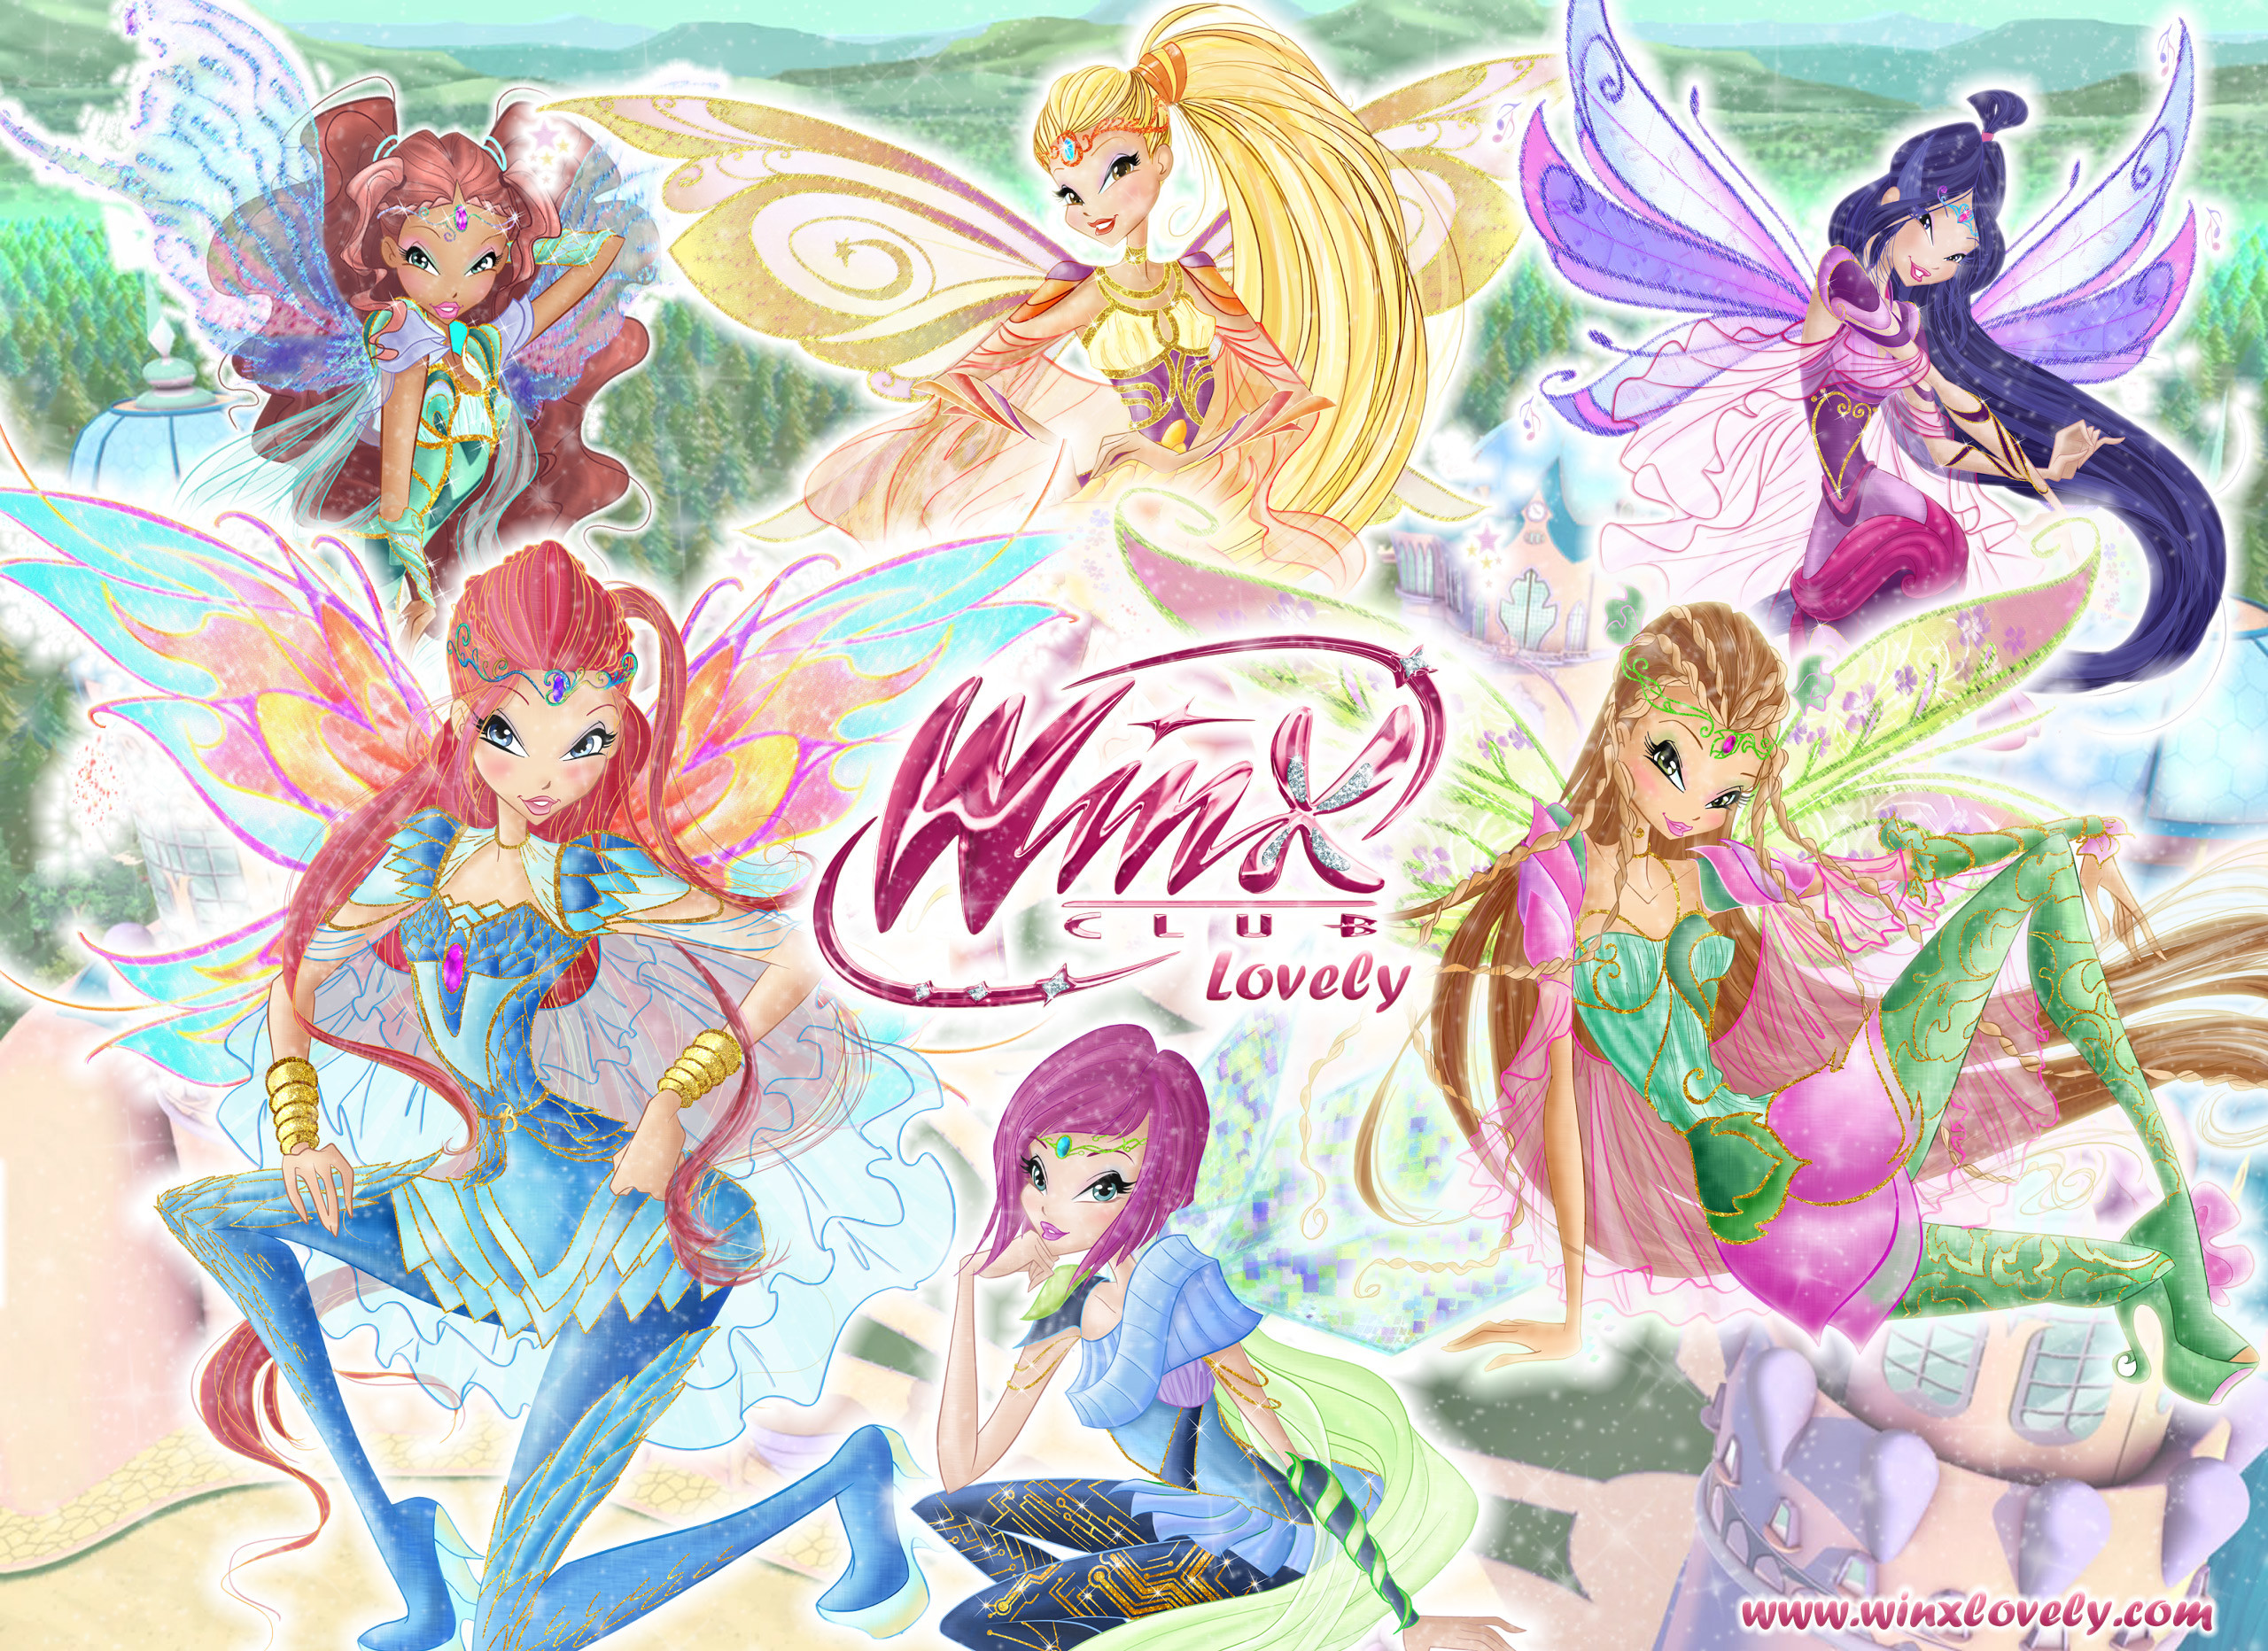 2560x1864 Winx Club Bloomix wallpaper by WinxLovely Winx Club Bloomix wallpaper by  WinxLovely